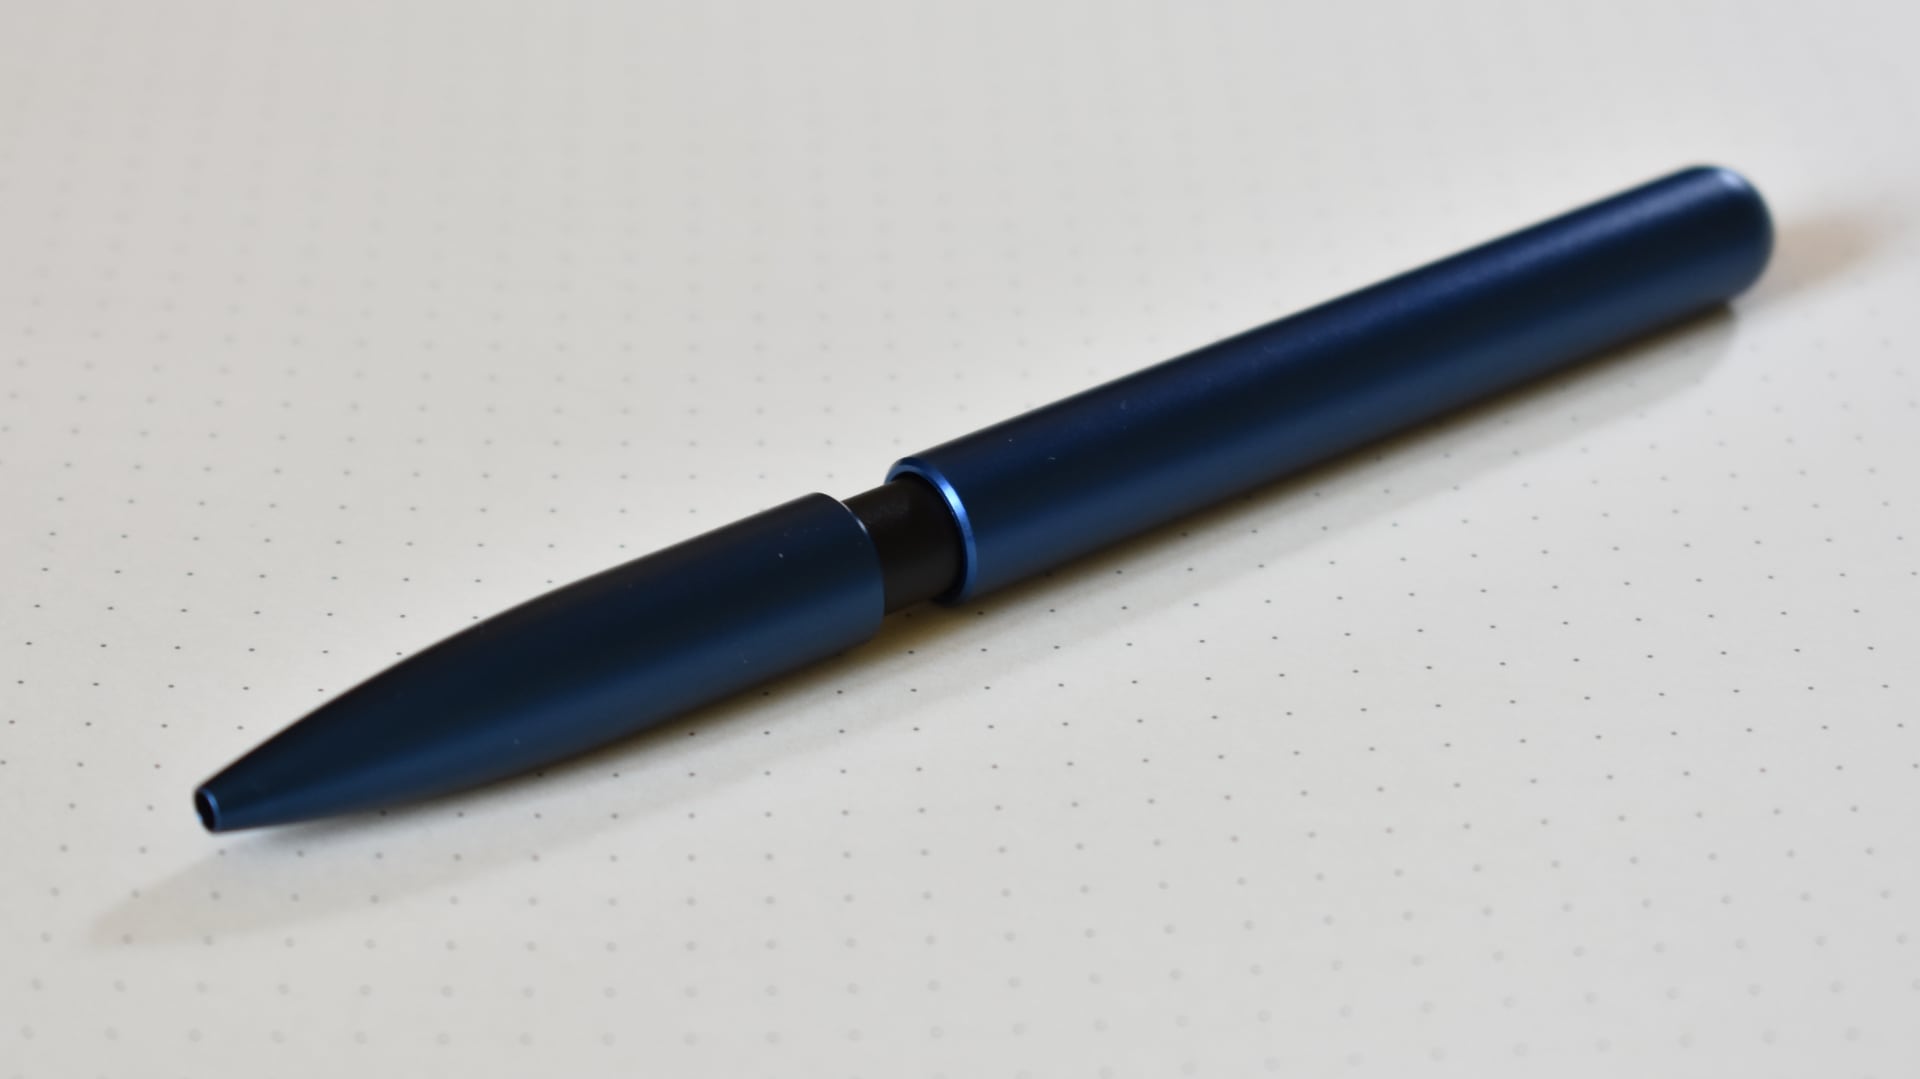 The pen, with the cap covering the refill cartridge